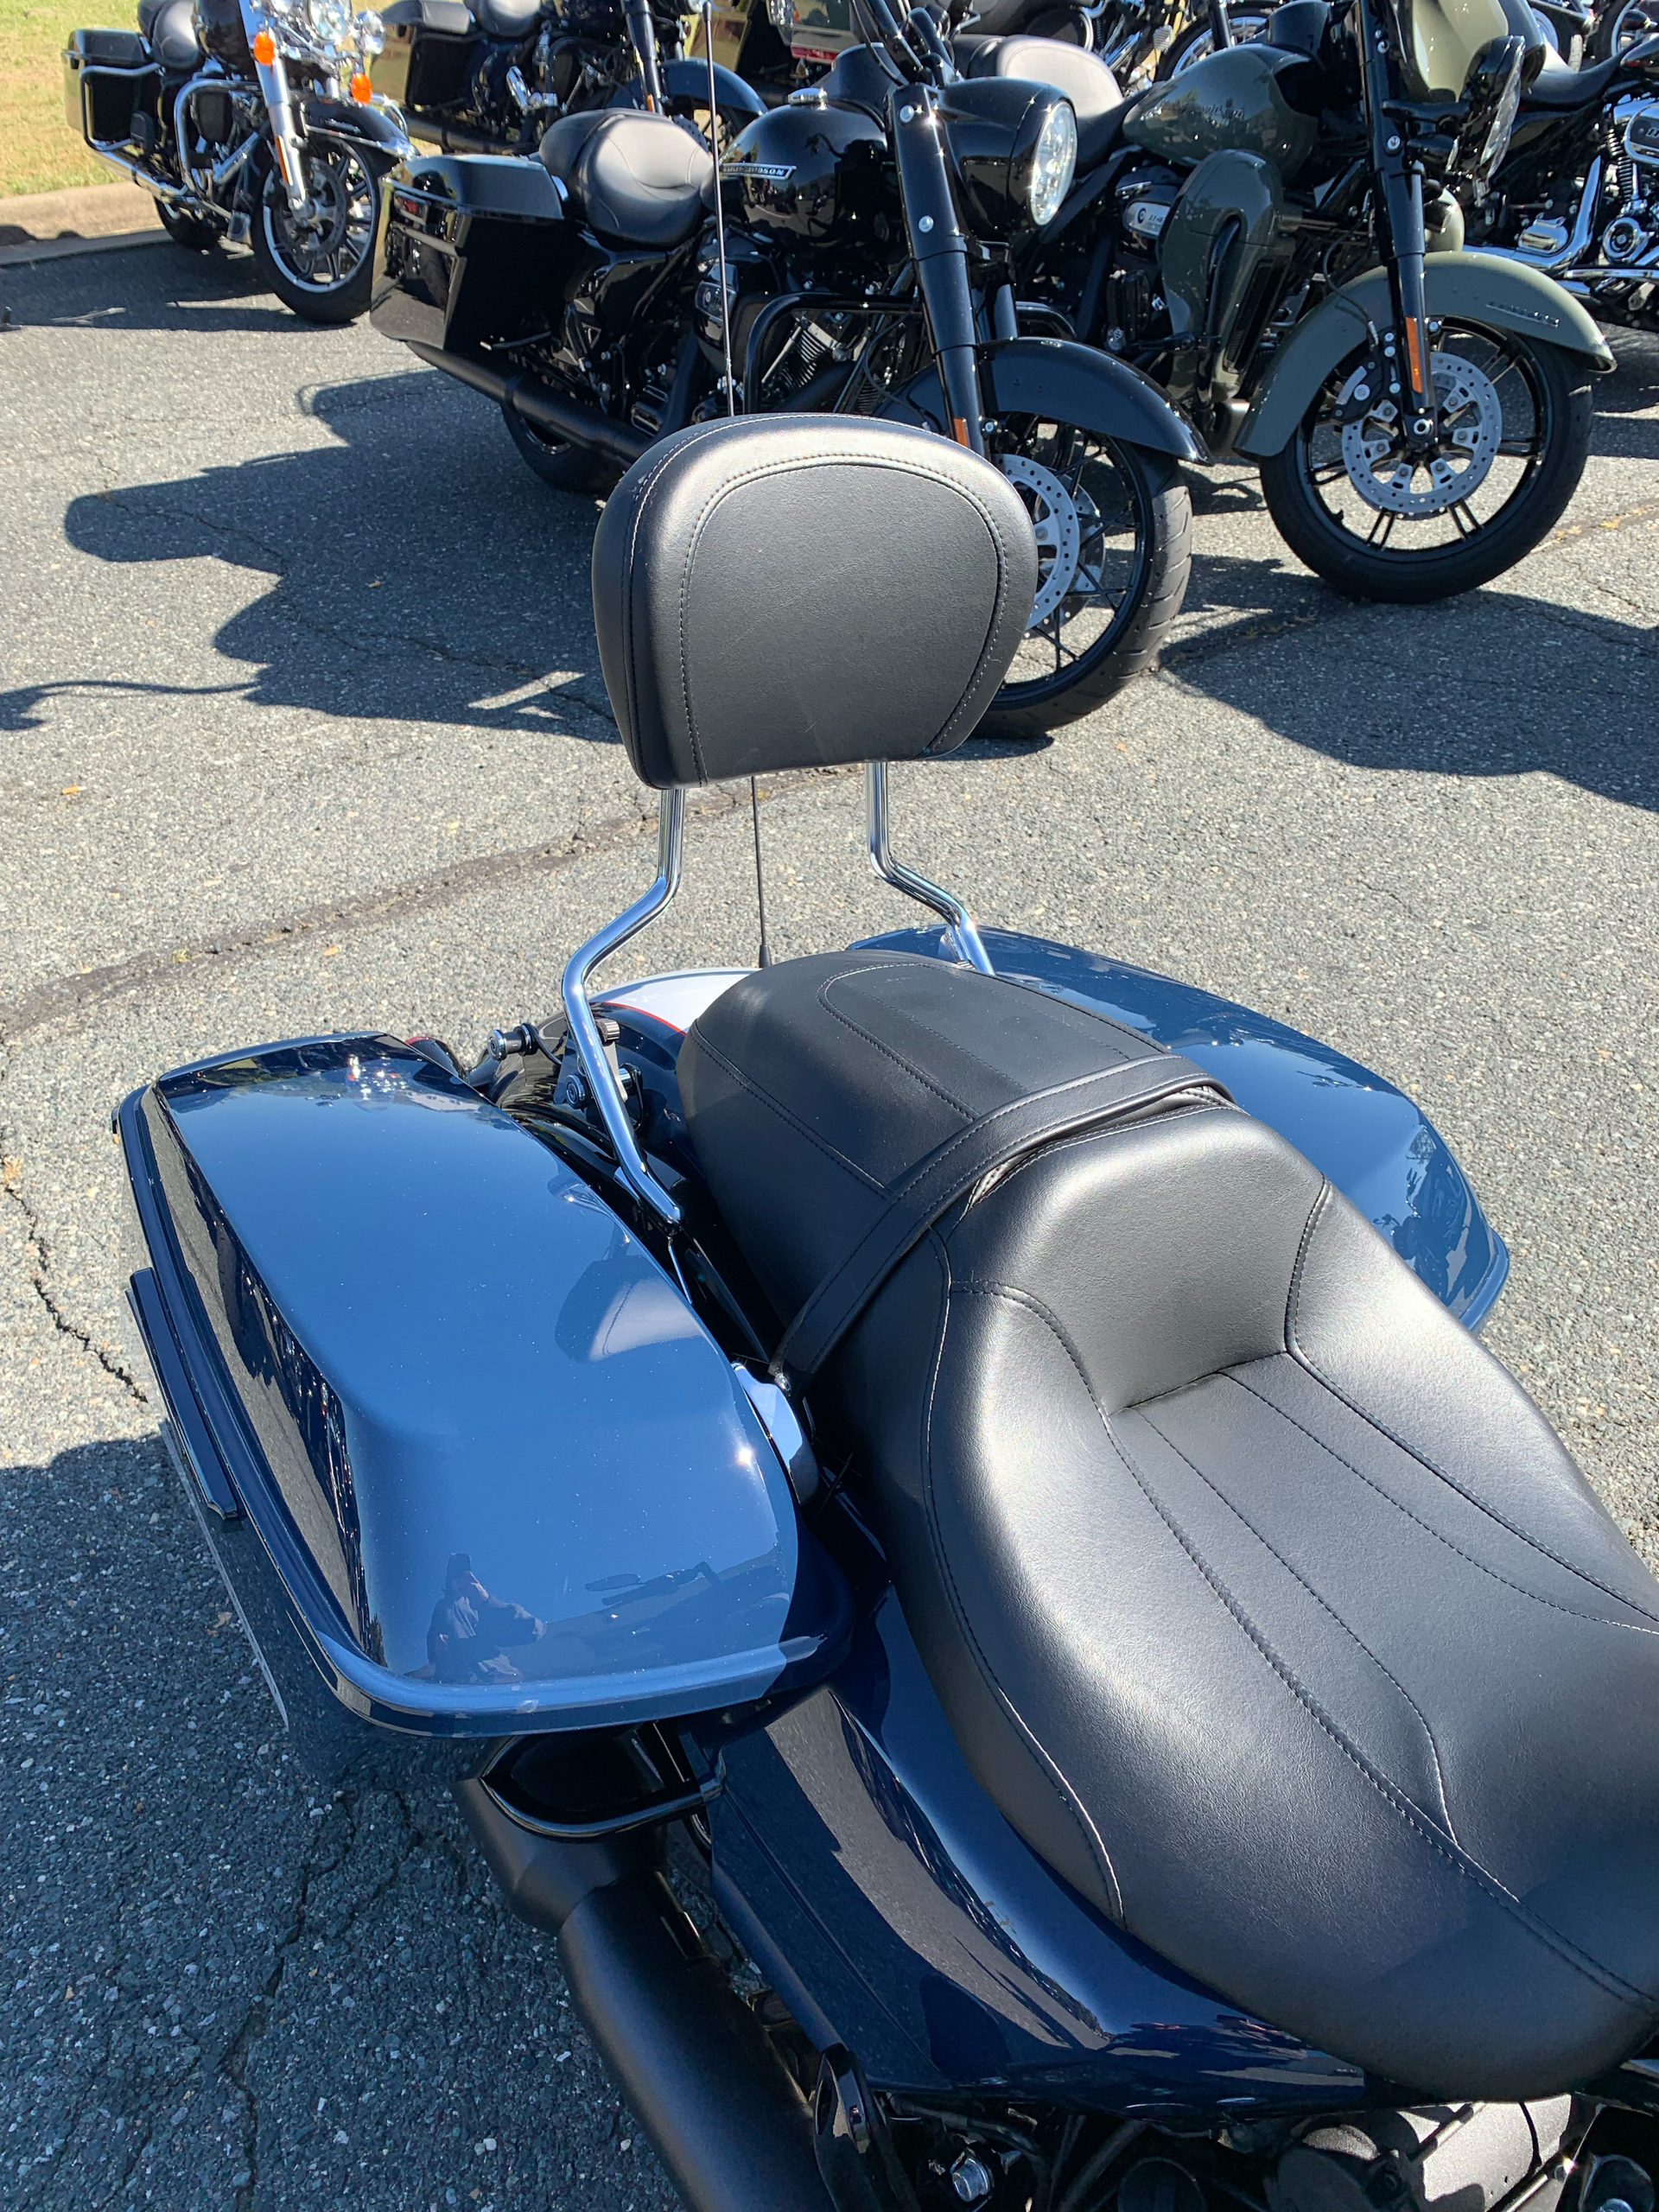 2020 Harley-Davidson Road Glide Special in Dumfries, Virginia - Photo 3